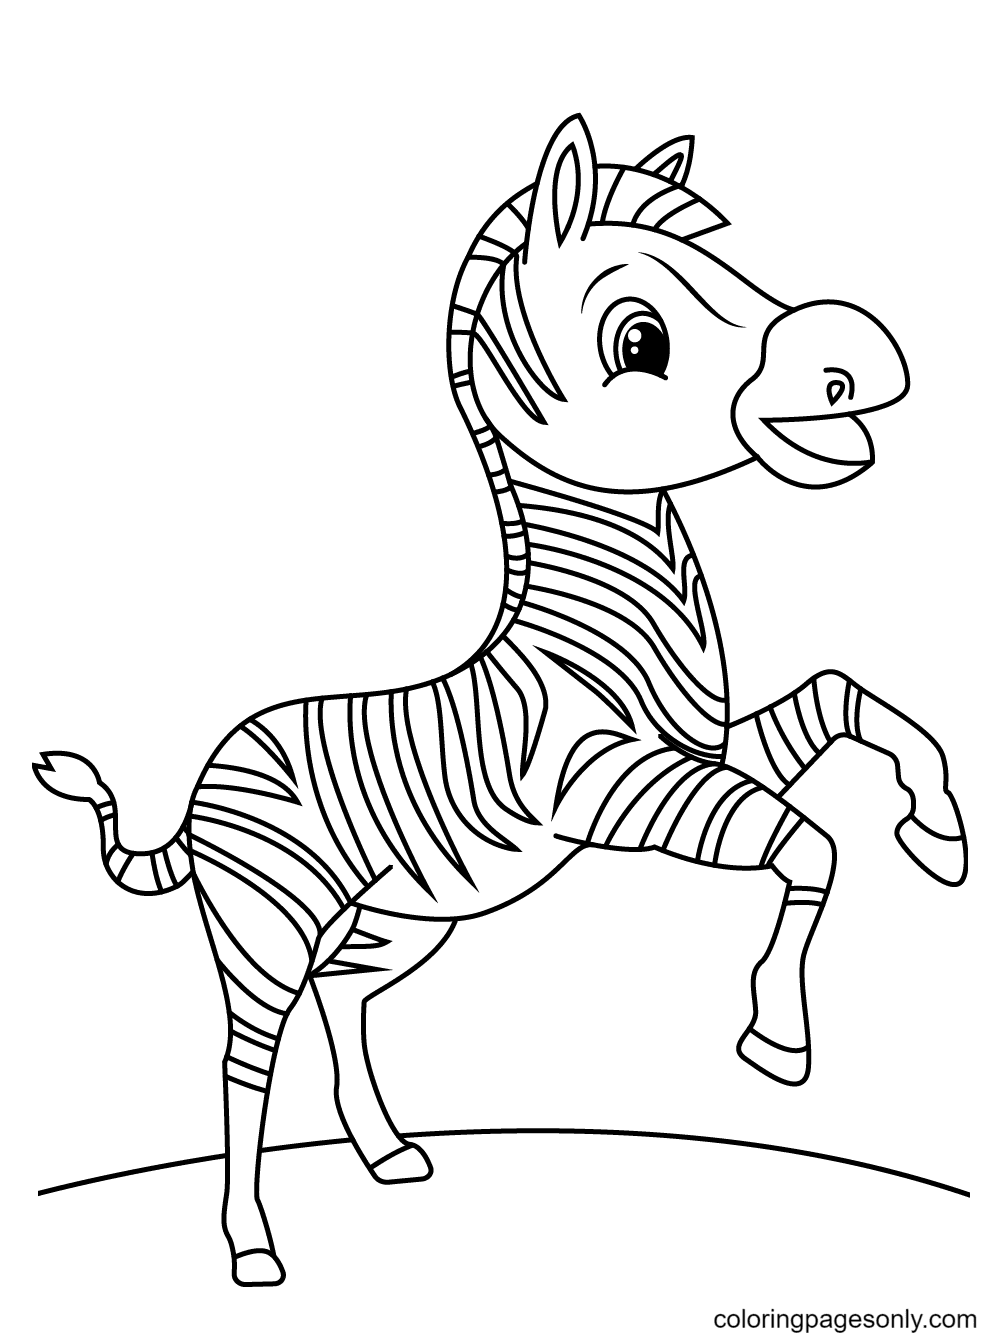 A Very Excited Zebra Coloring Pages